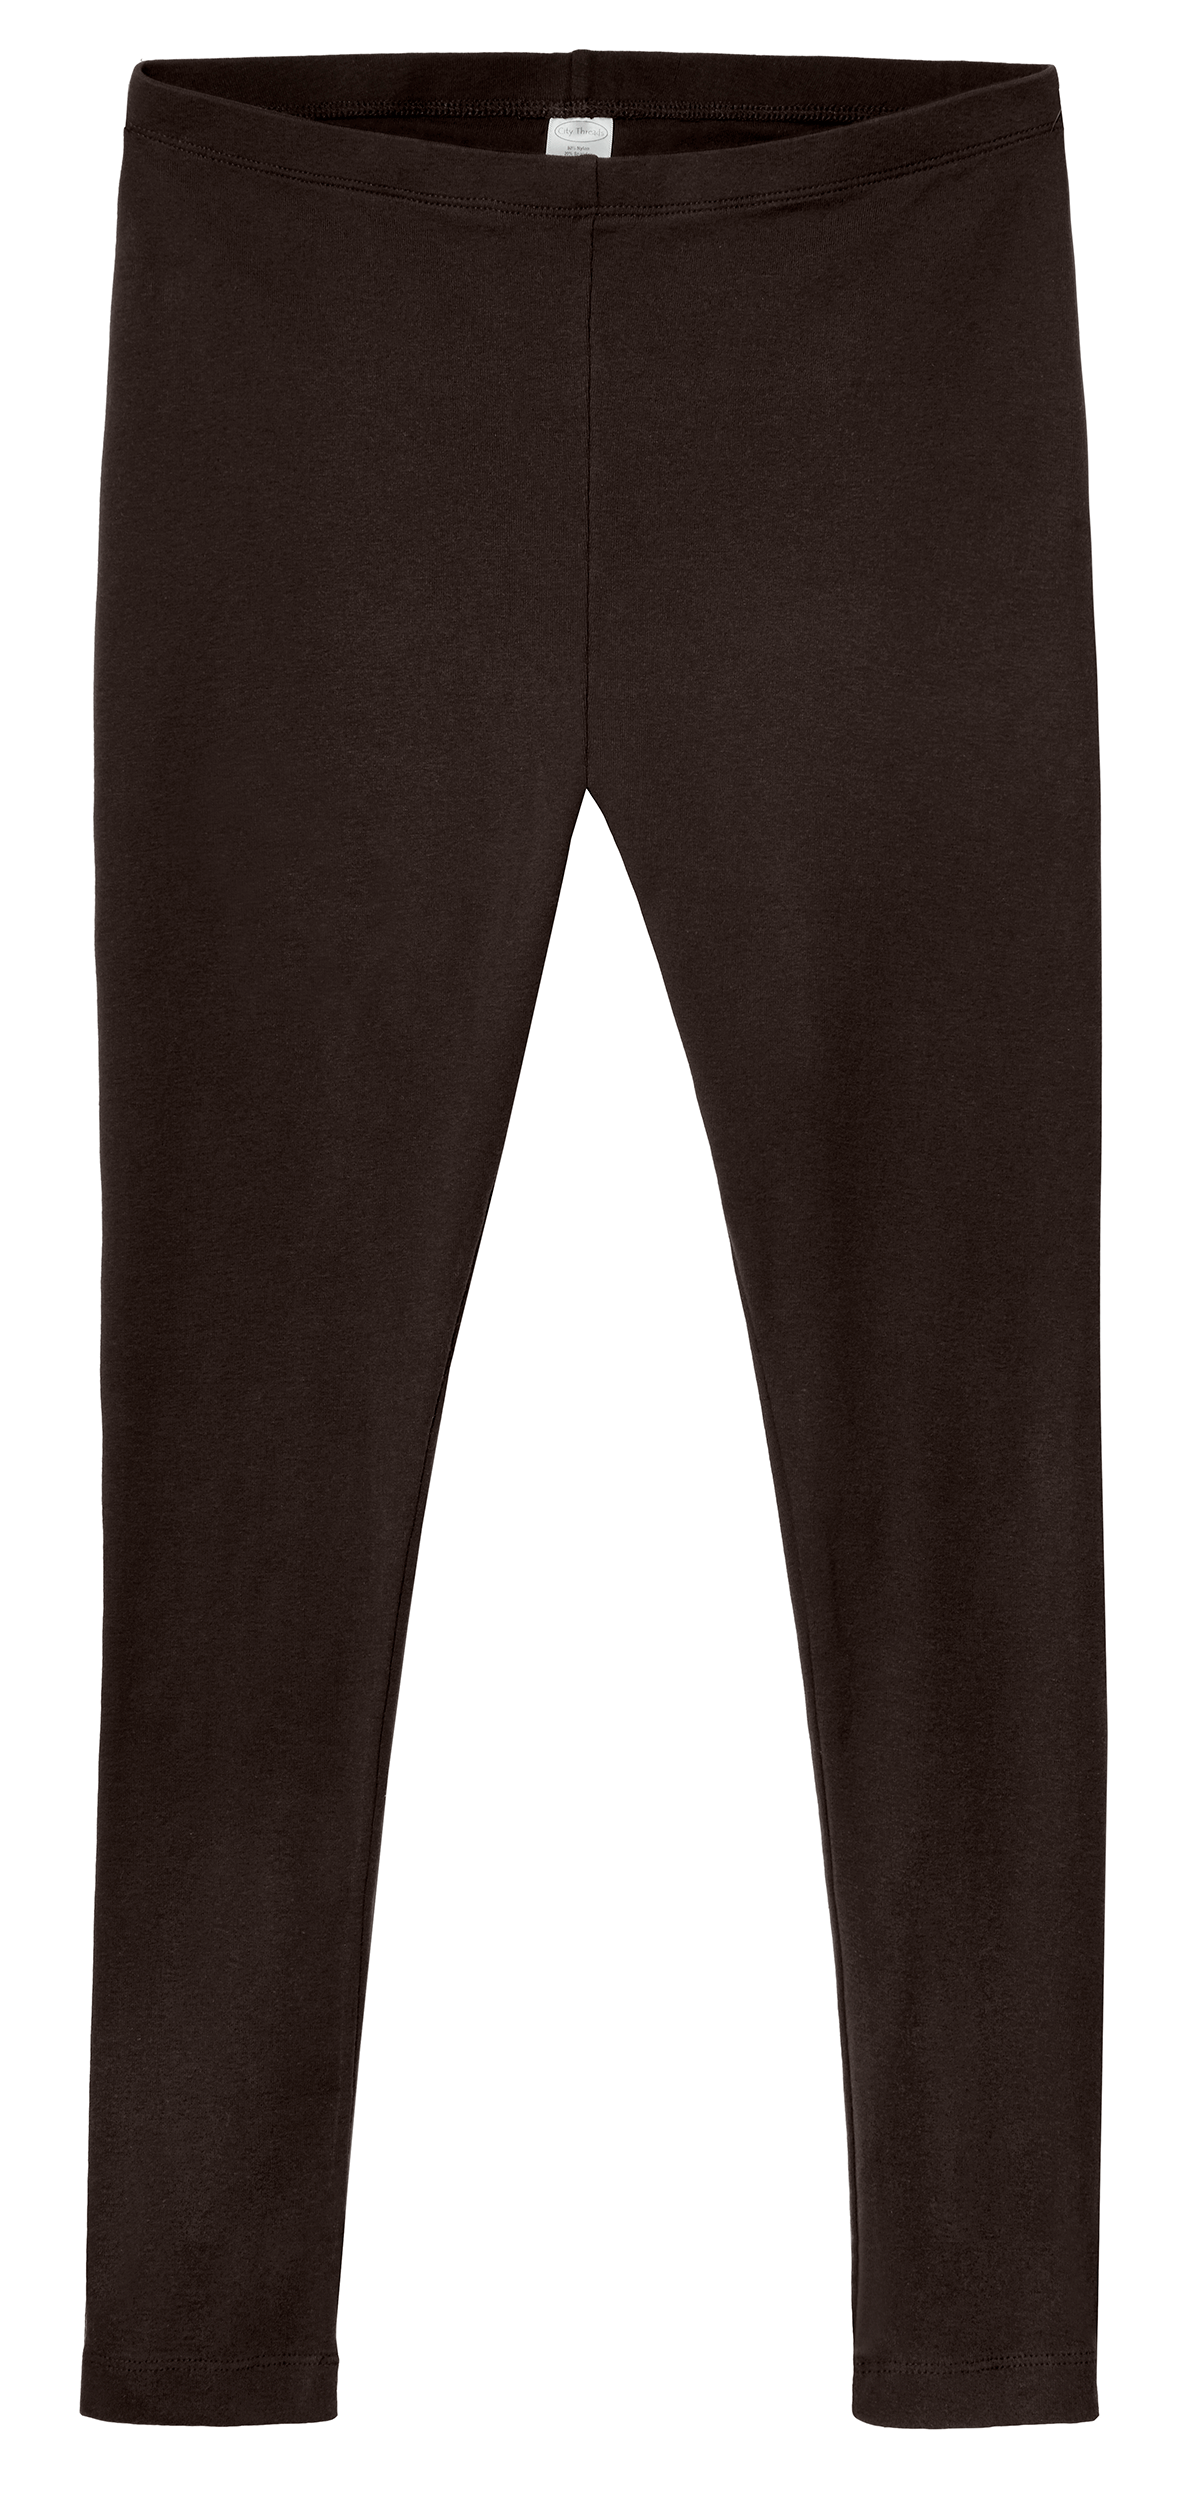 World of Leggings® Made in The USA High Waisted Cotton Leggings - Shop 7  Colors